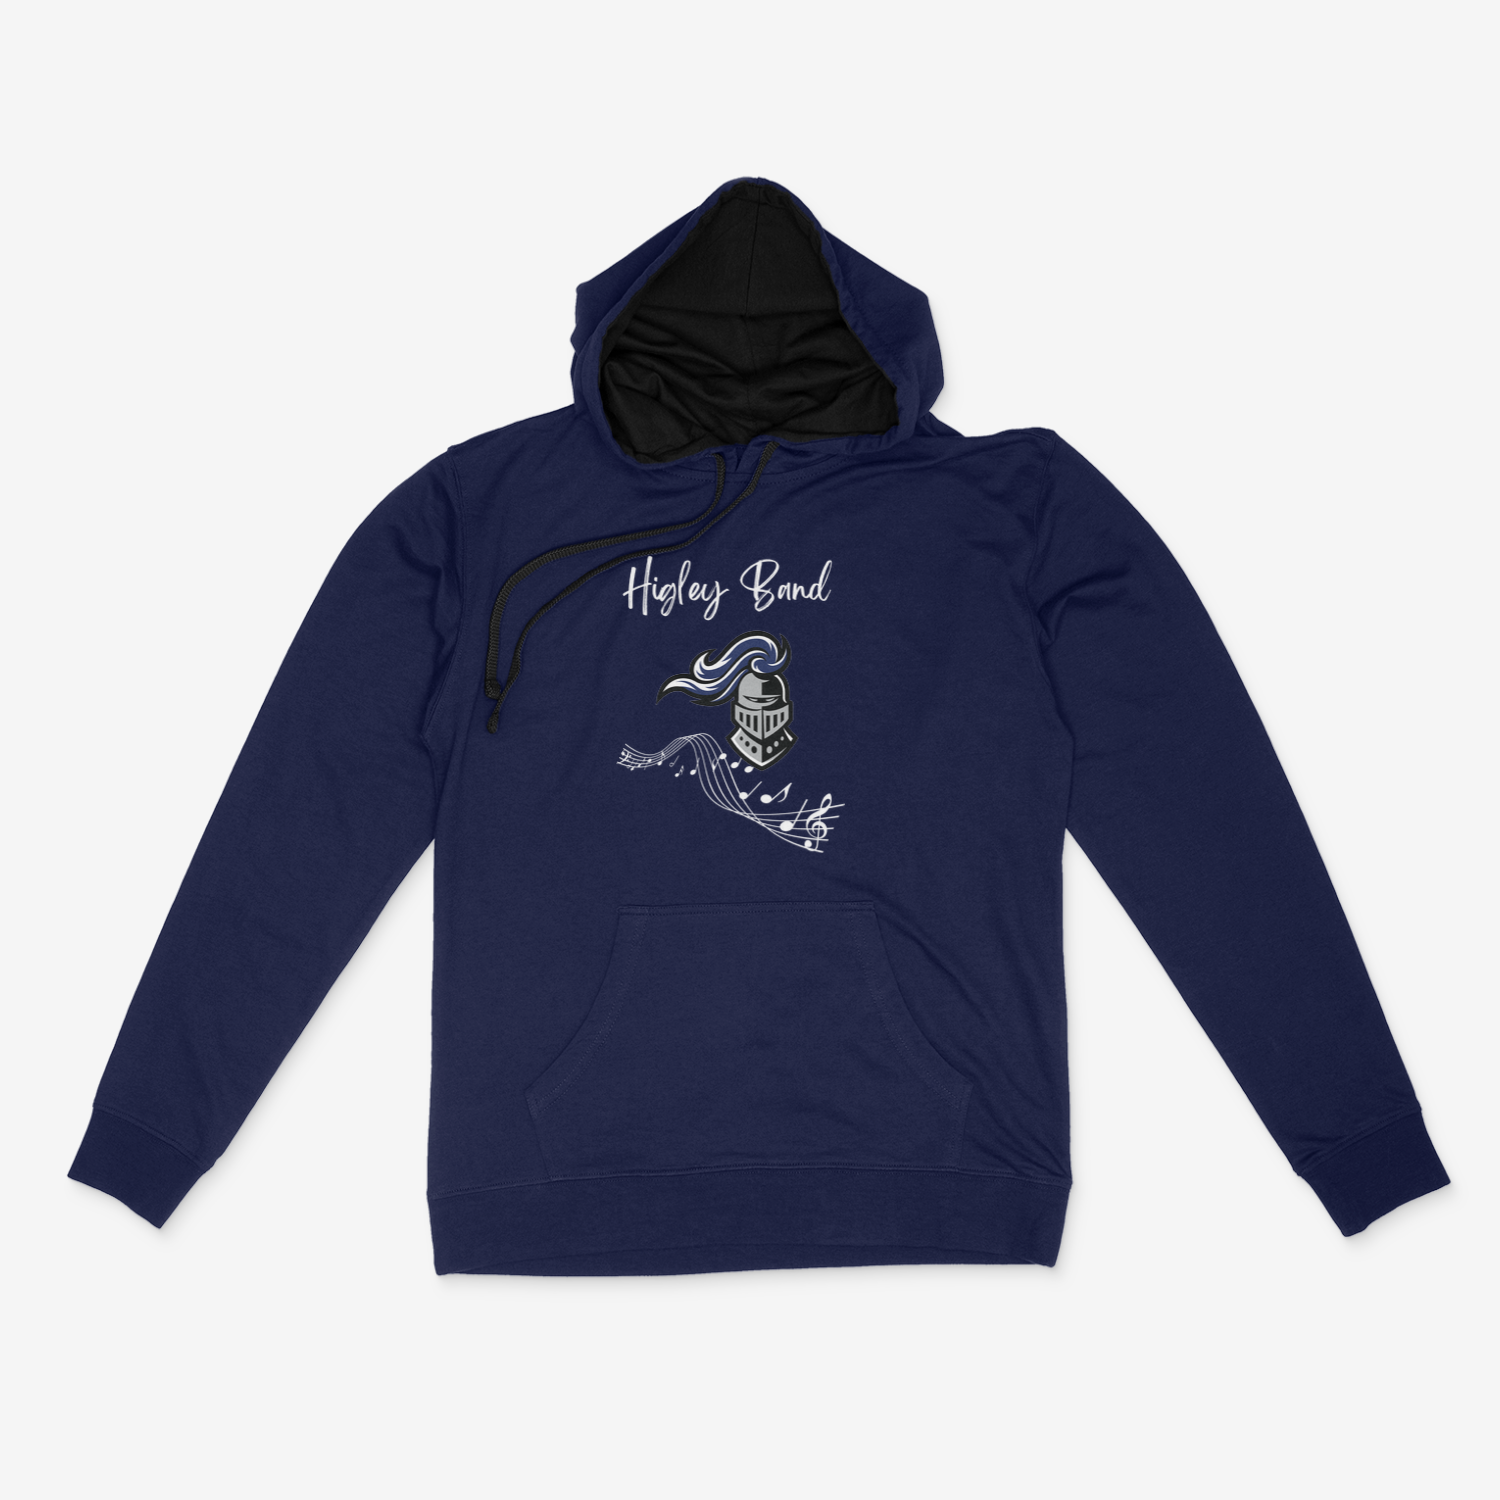 Higley Band Pullover Hoodie - Student